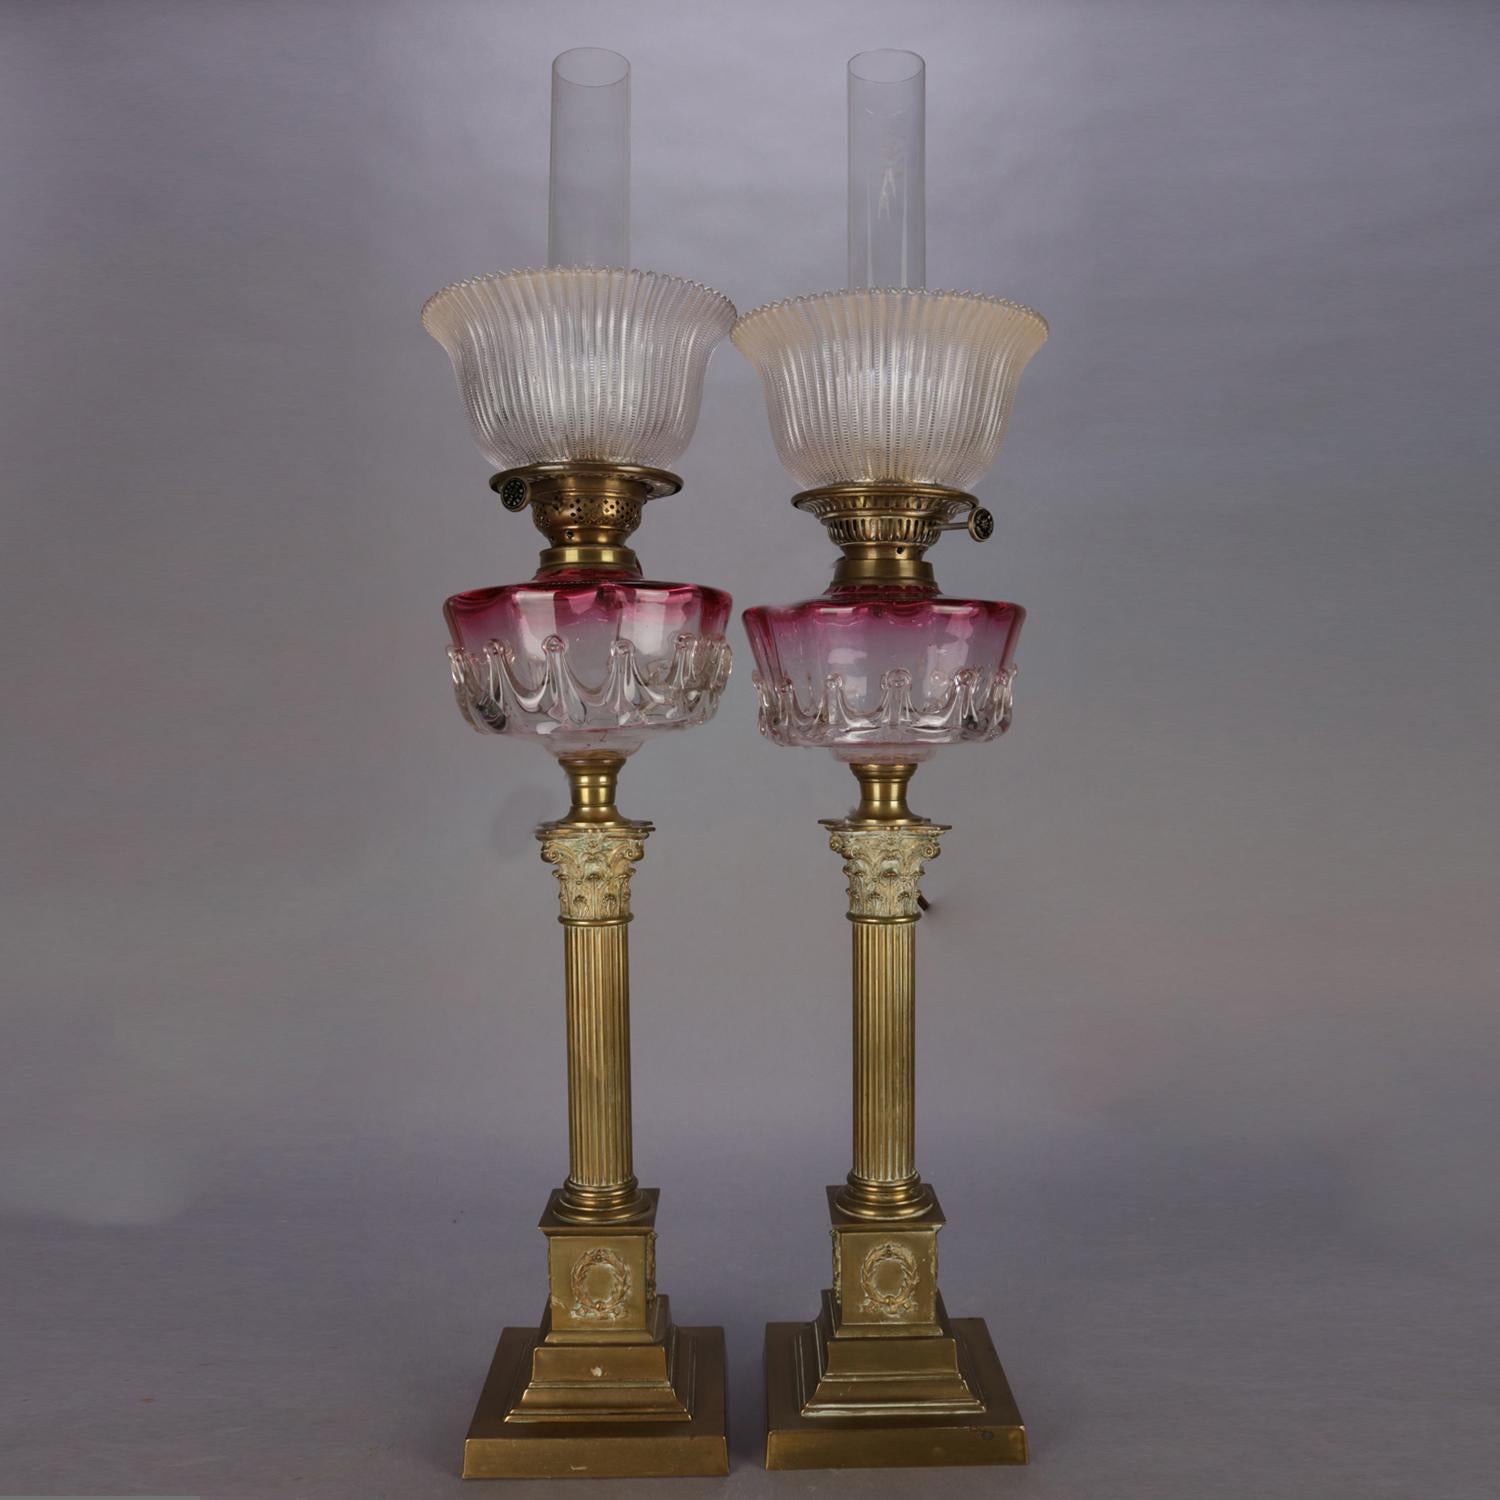 American Antique Pair of Rubina Glass and Brass Electrified Oil Parlor Lamps, circa 1840